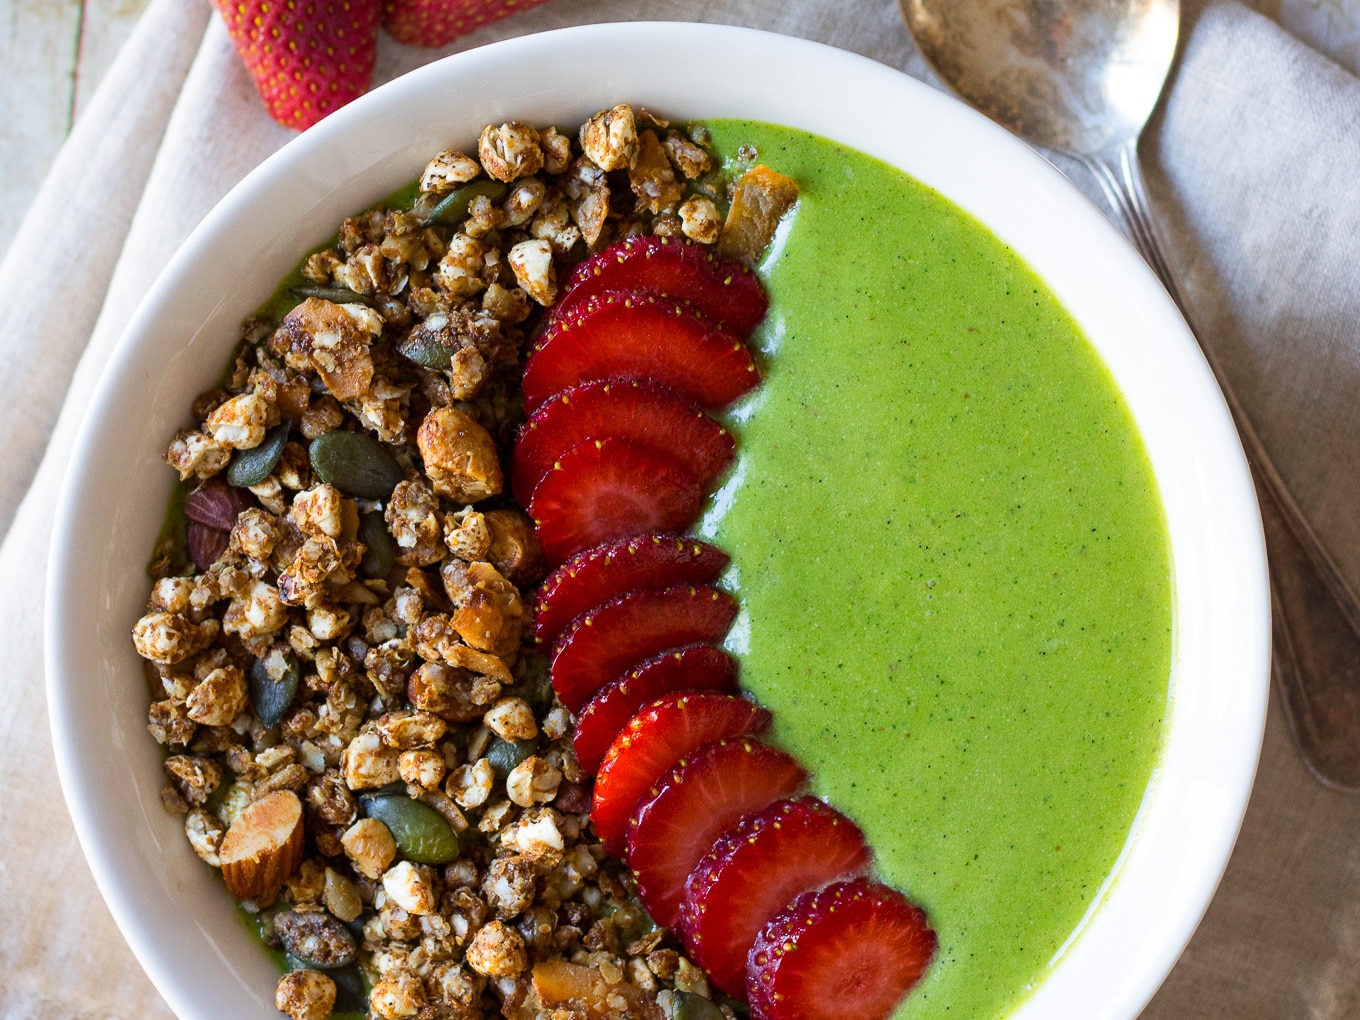 A thick green protein #smoothiebowl is a quick, satisfying healthy breakfast ready in no time. #paleo and #glutenfree, with an easy vegan #dairyfree option too.